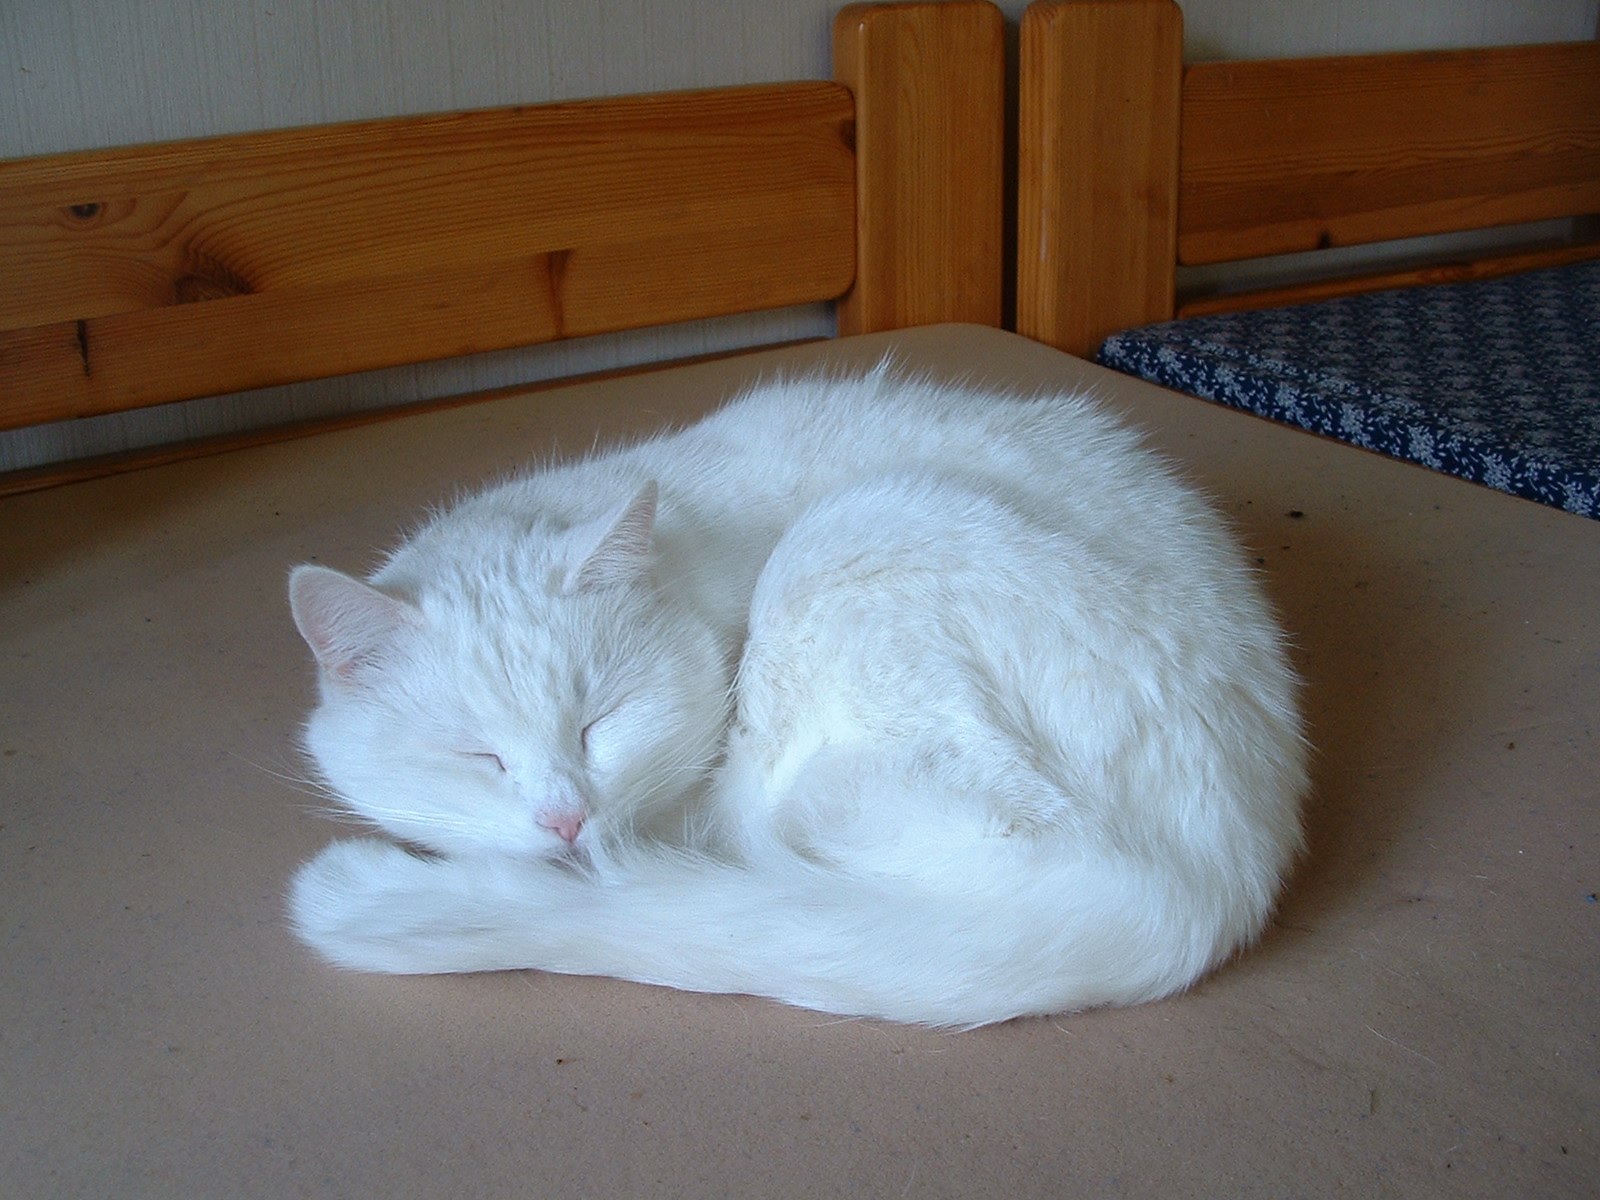 a white cat curled up asleep on a bed